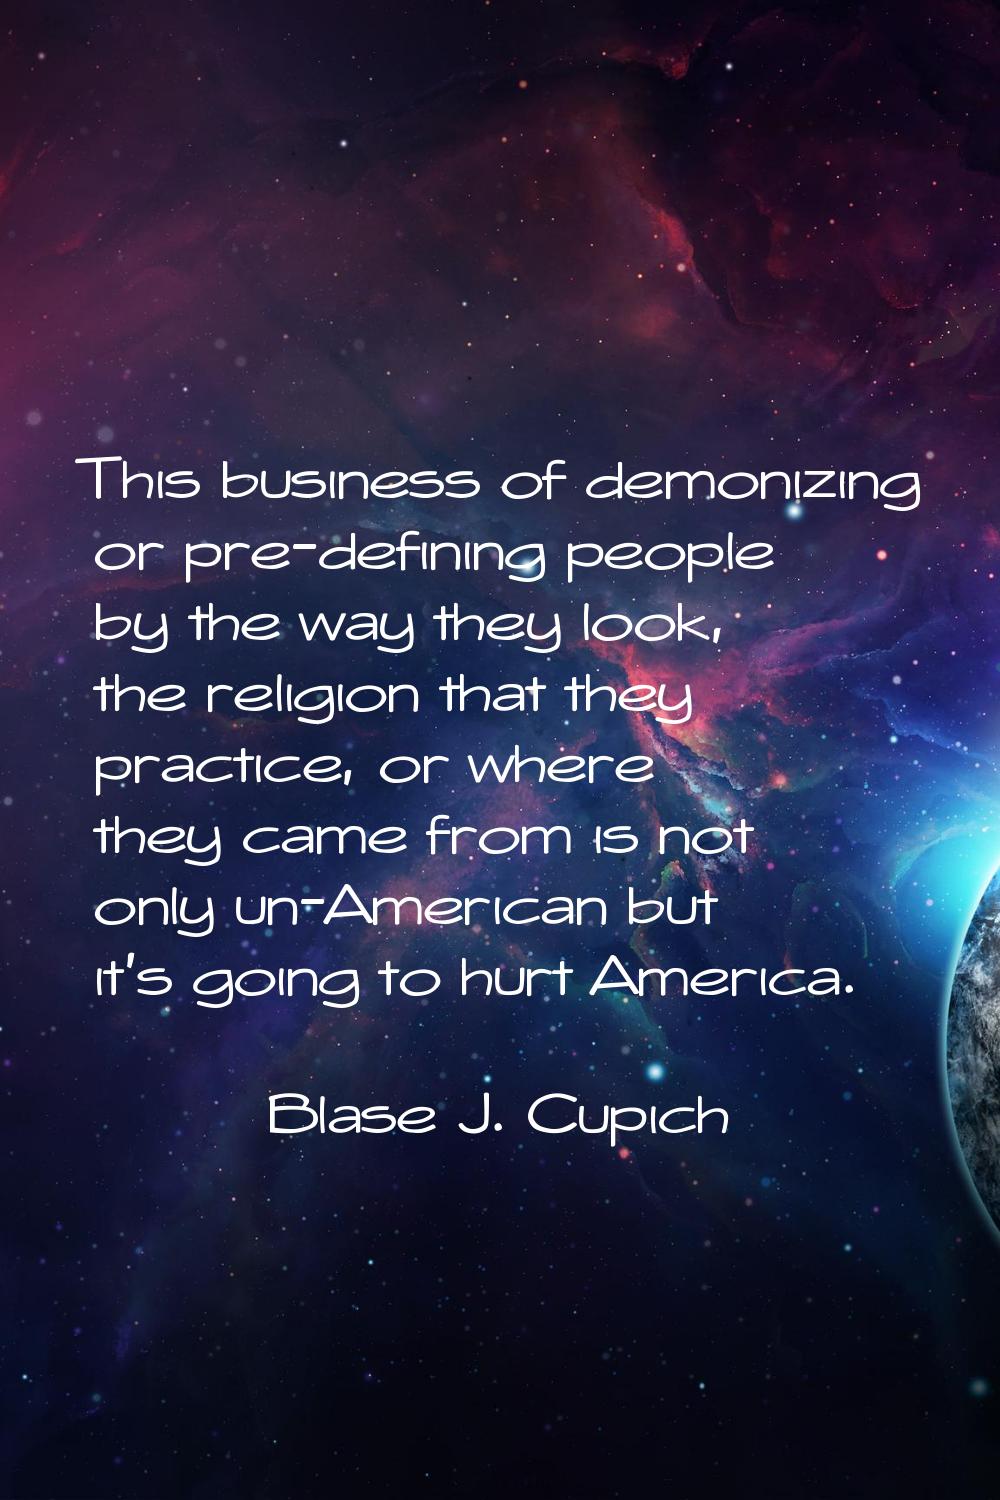 This business of demonizing or pre-defining people by the way they look, the religion that they pra